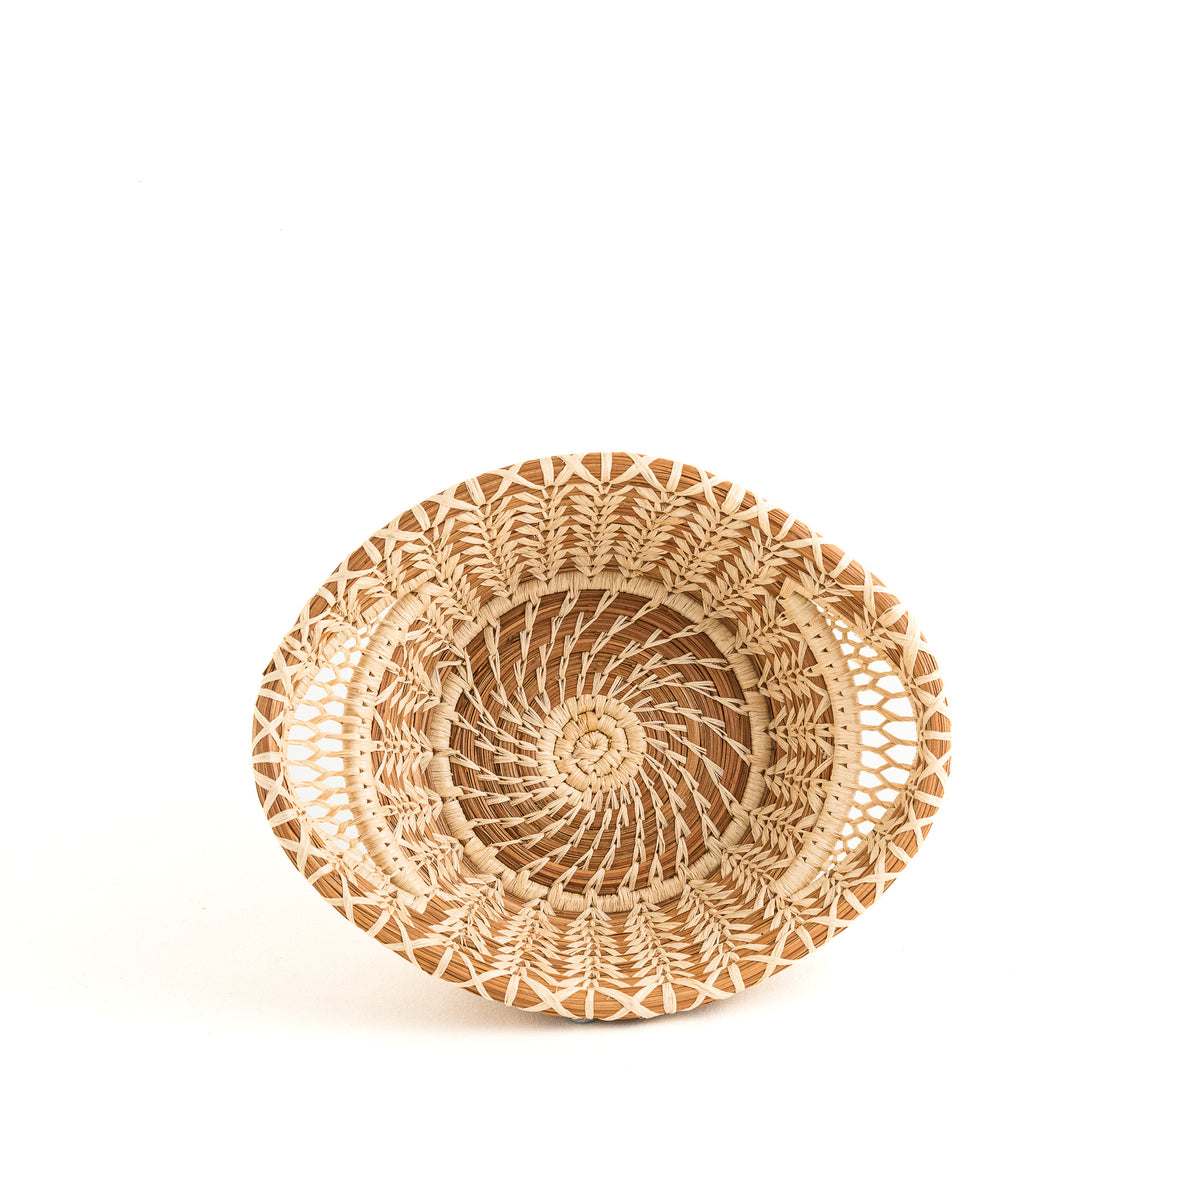 Small Pine Needle Basket with Lacy Handles top view